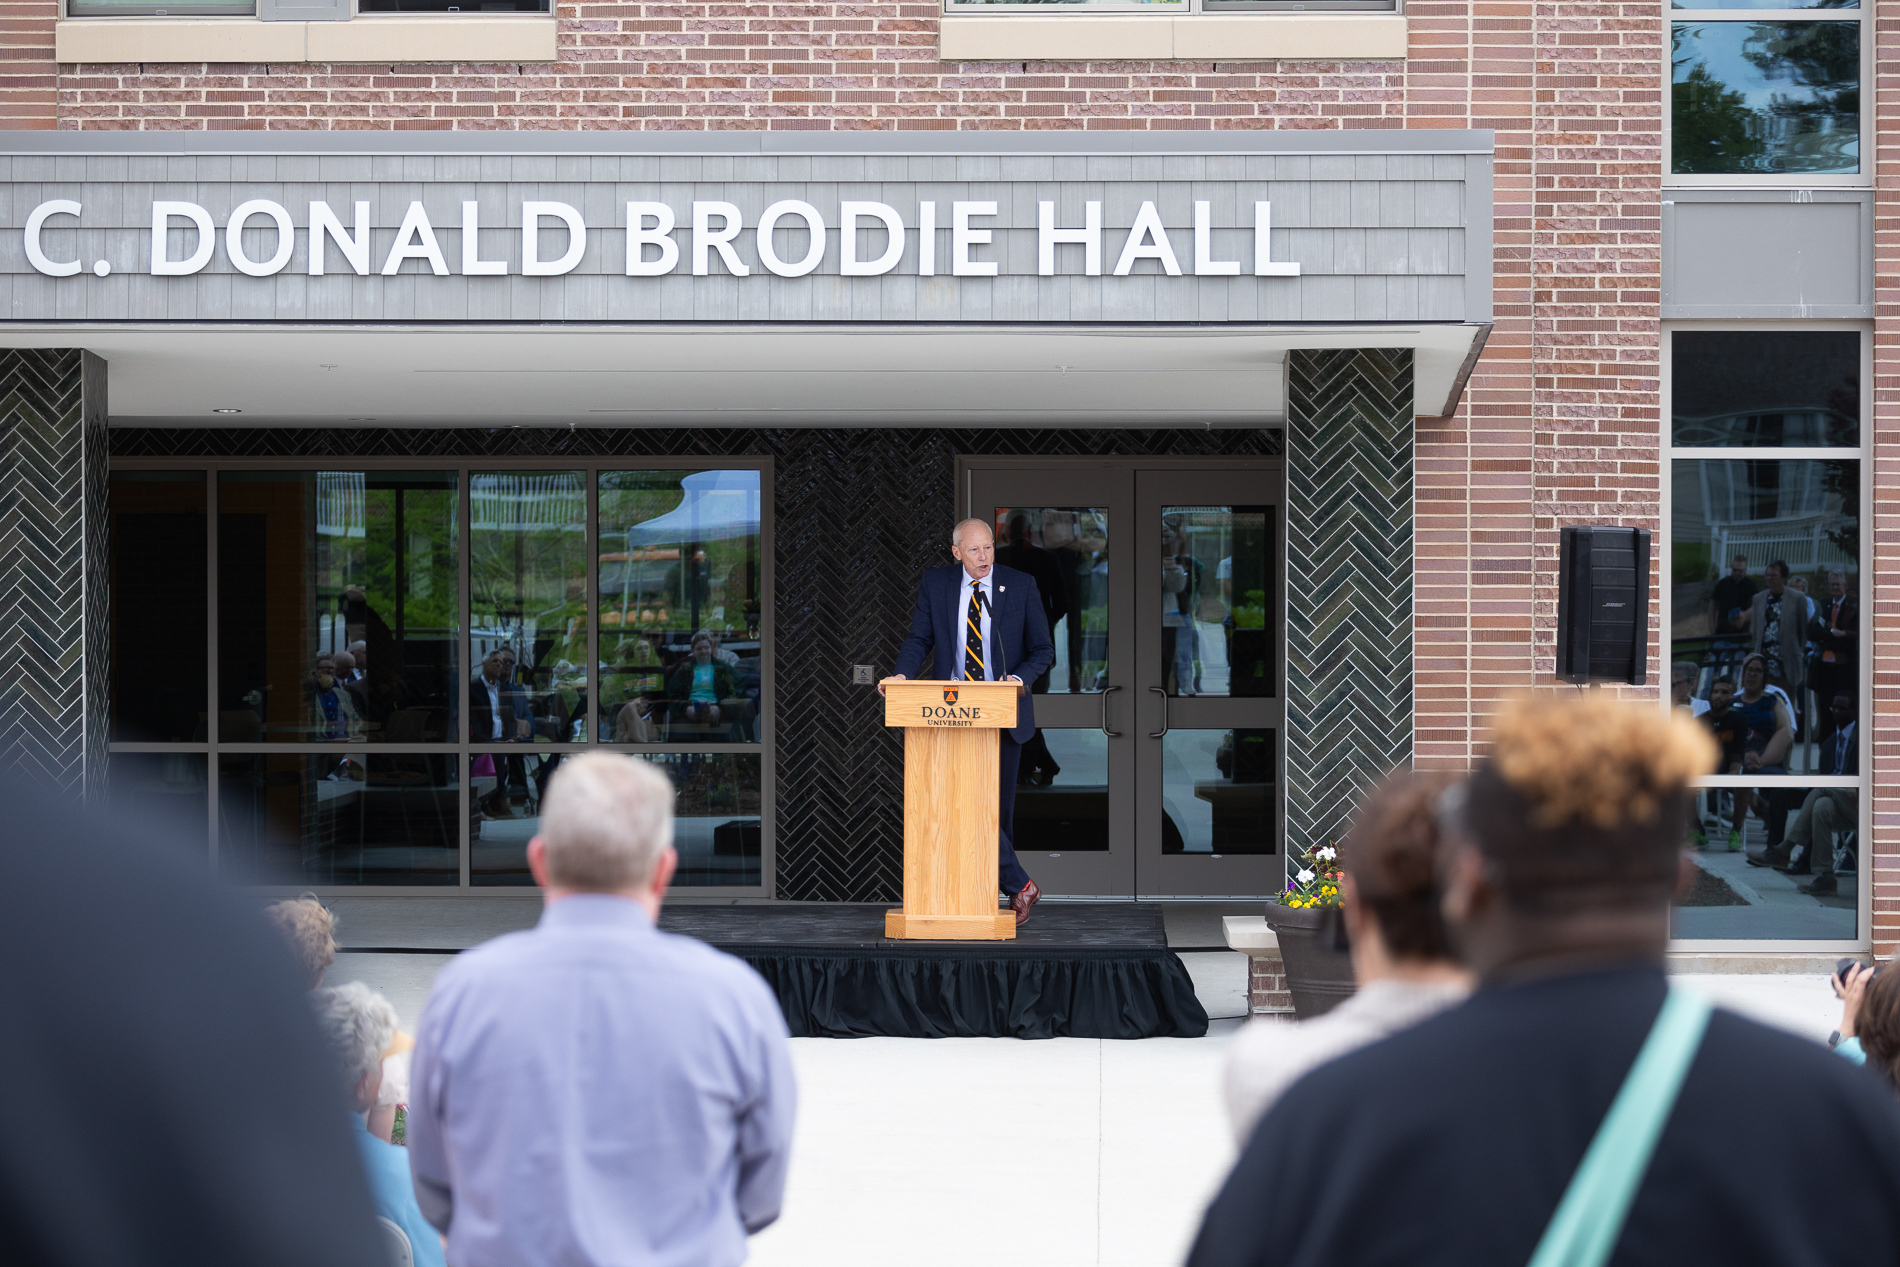 A man in a suit stands behind a wooden podium in front of an audience. Behind him is a building with a name reading "C. Donald Brodie Hall."